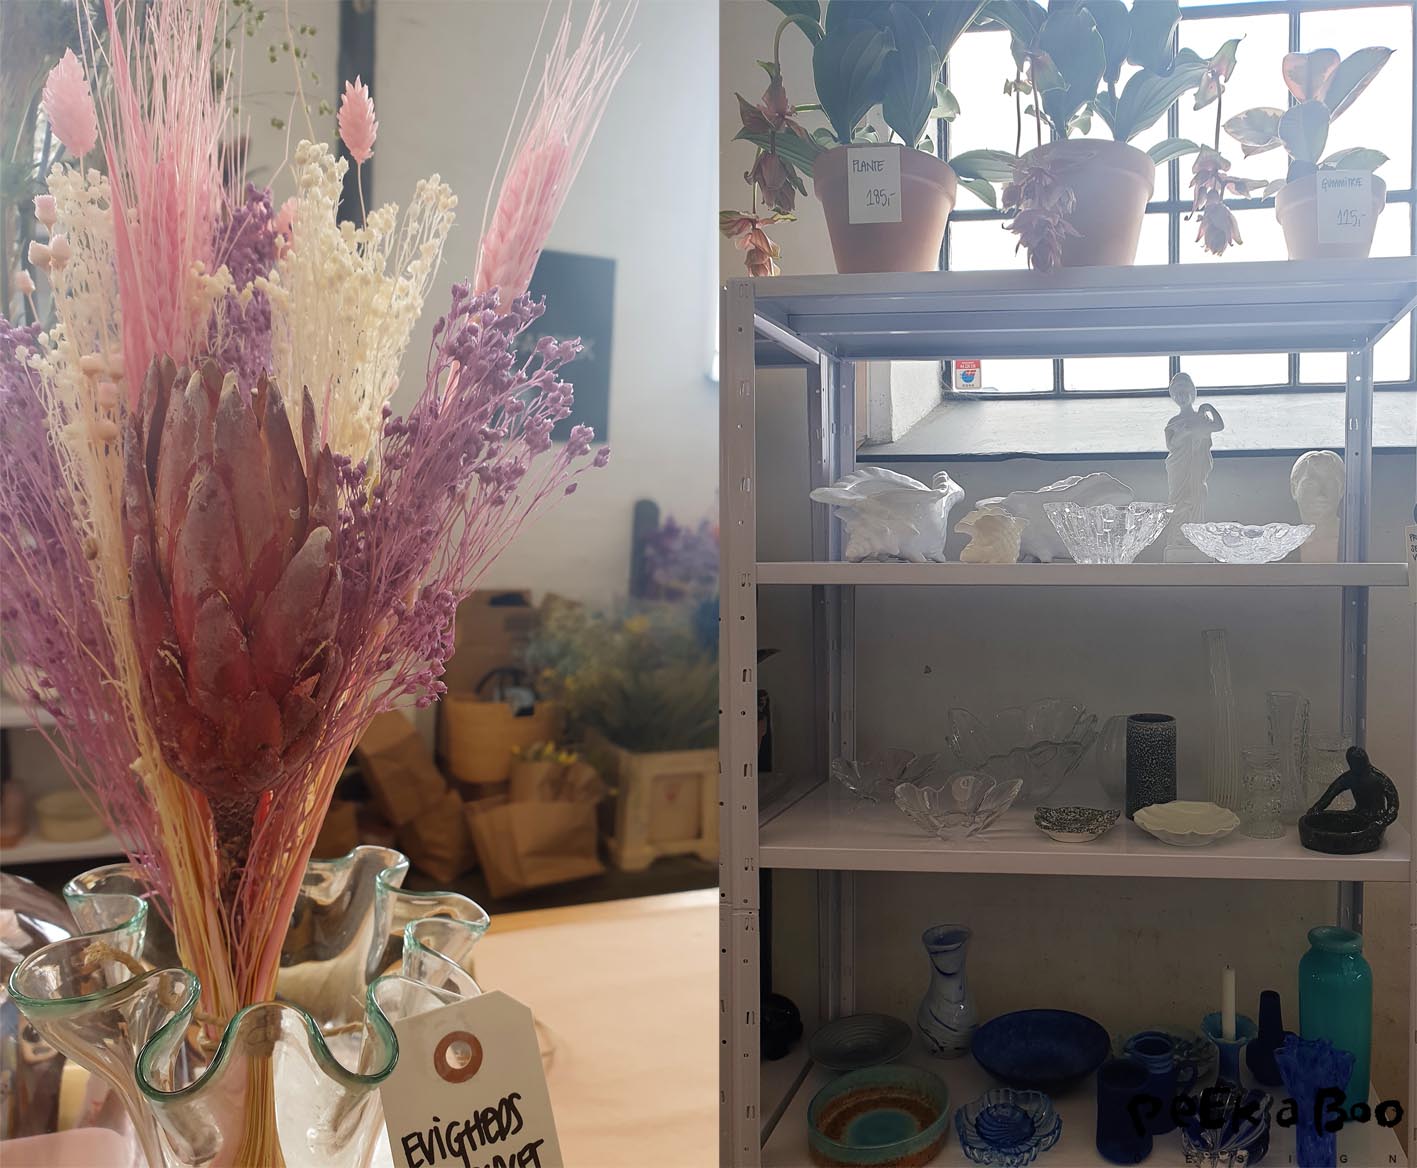 Howabout.dk is a webshop with the dryed flowers, vases and other goods. And they also have a selection of vintage/retro finds related to flowers in their shop.